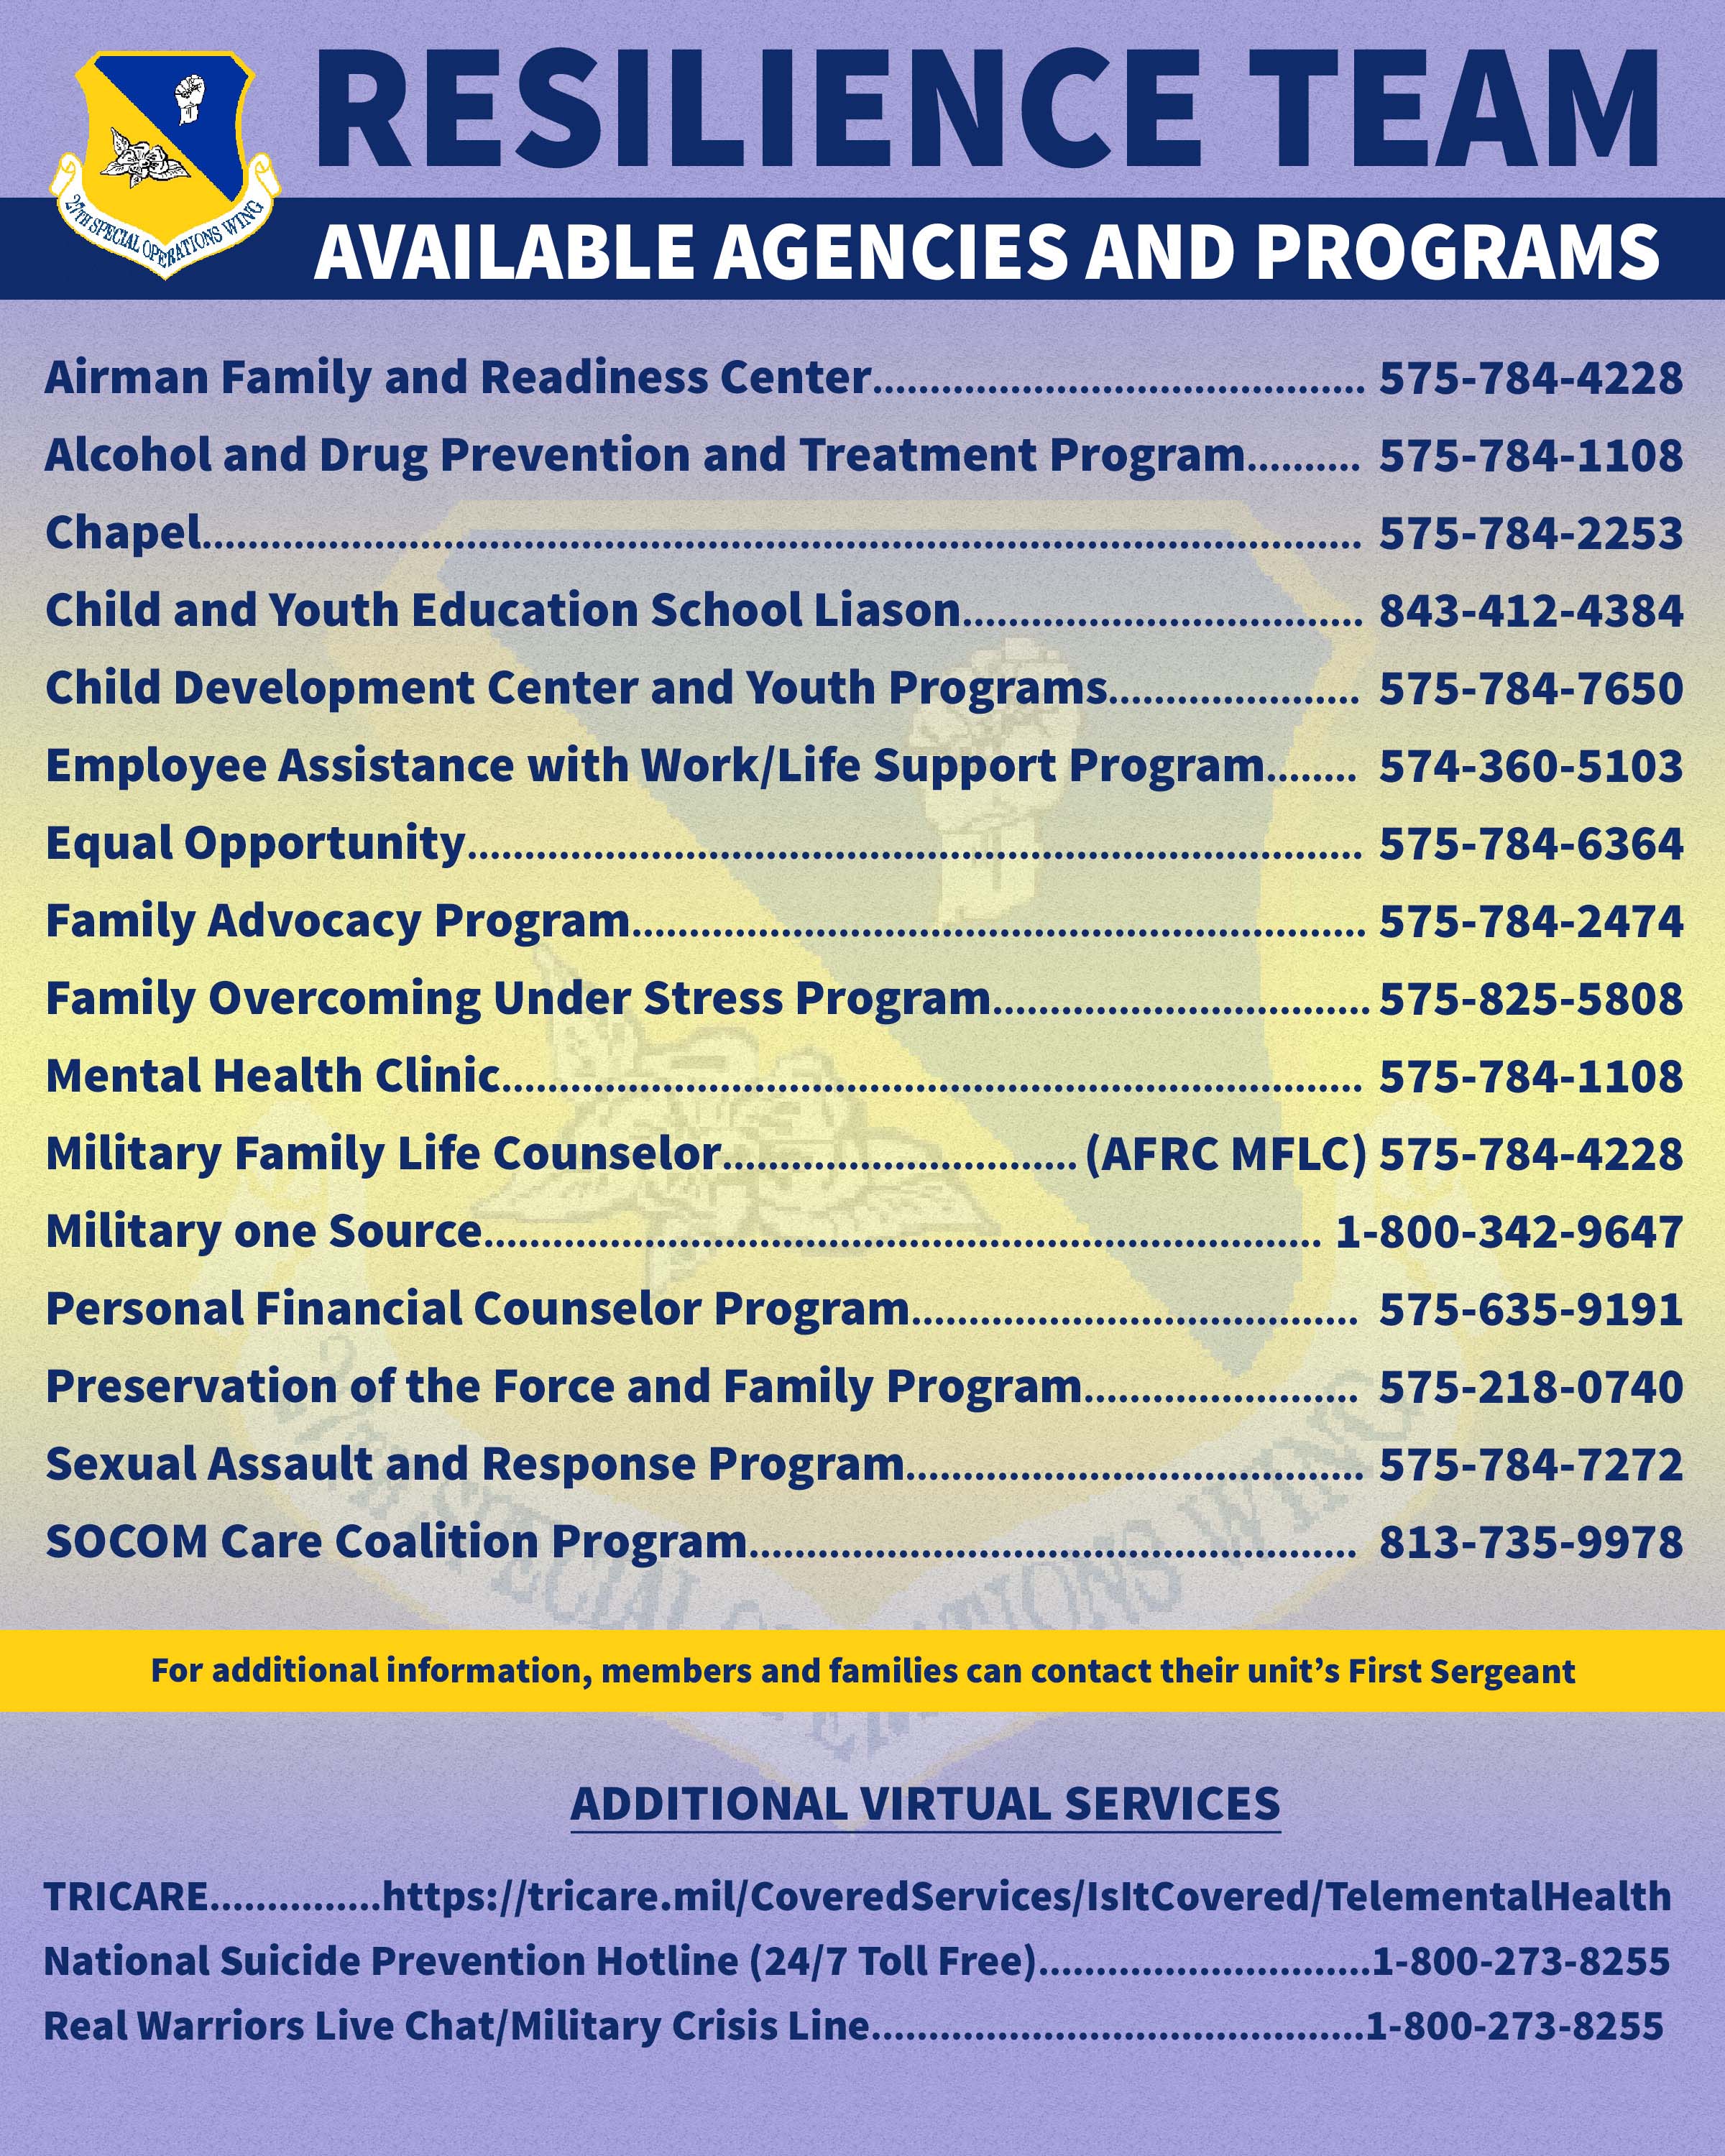 Available resilience agencies and programs